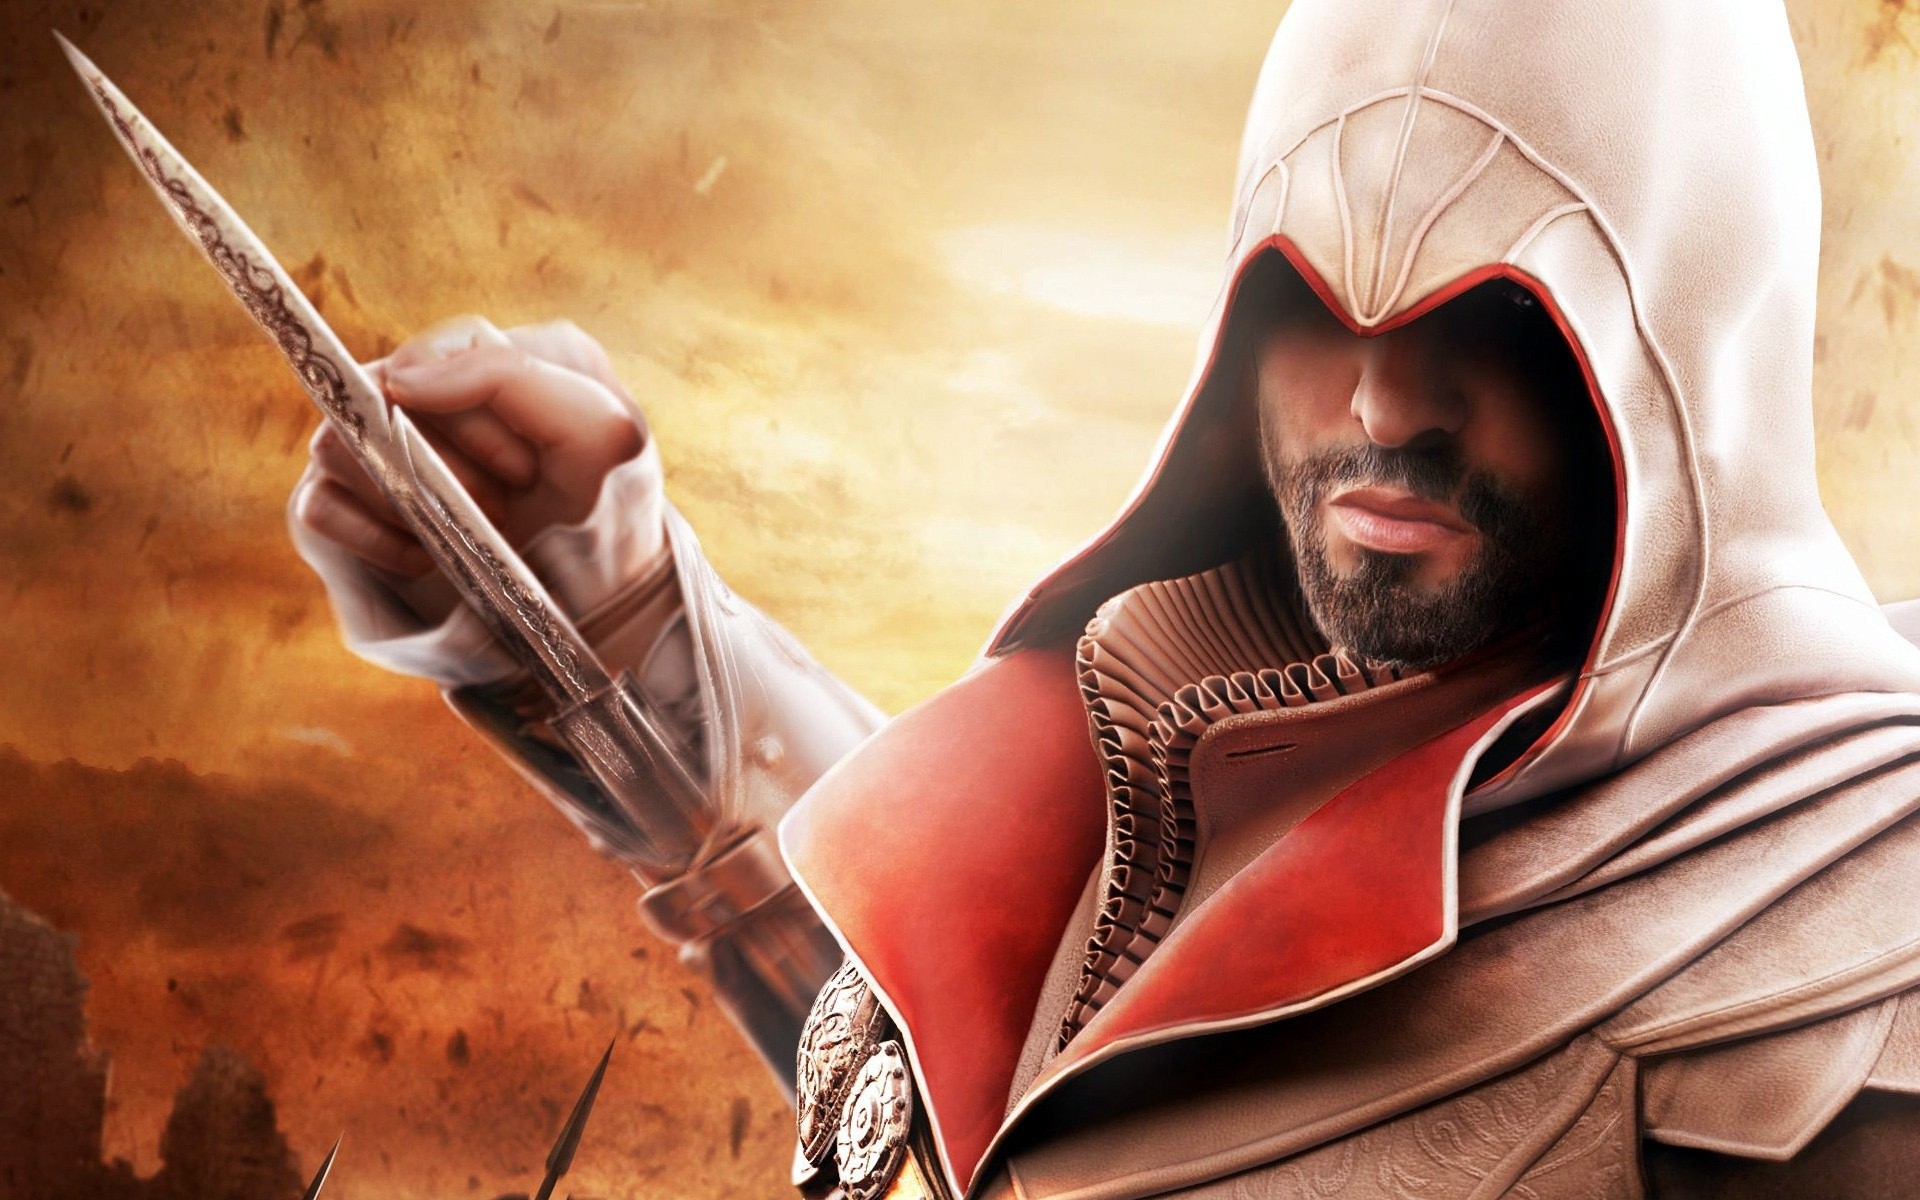 Video Game Assassin's Creed: Brotherhood HD Wallpaper | Background Image